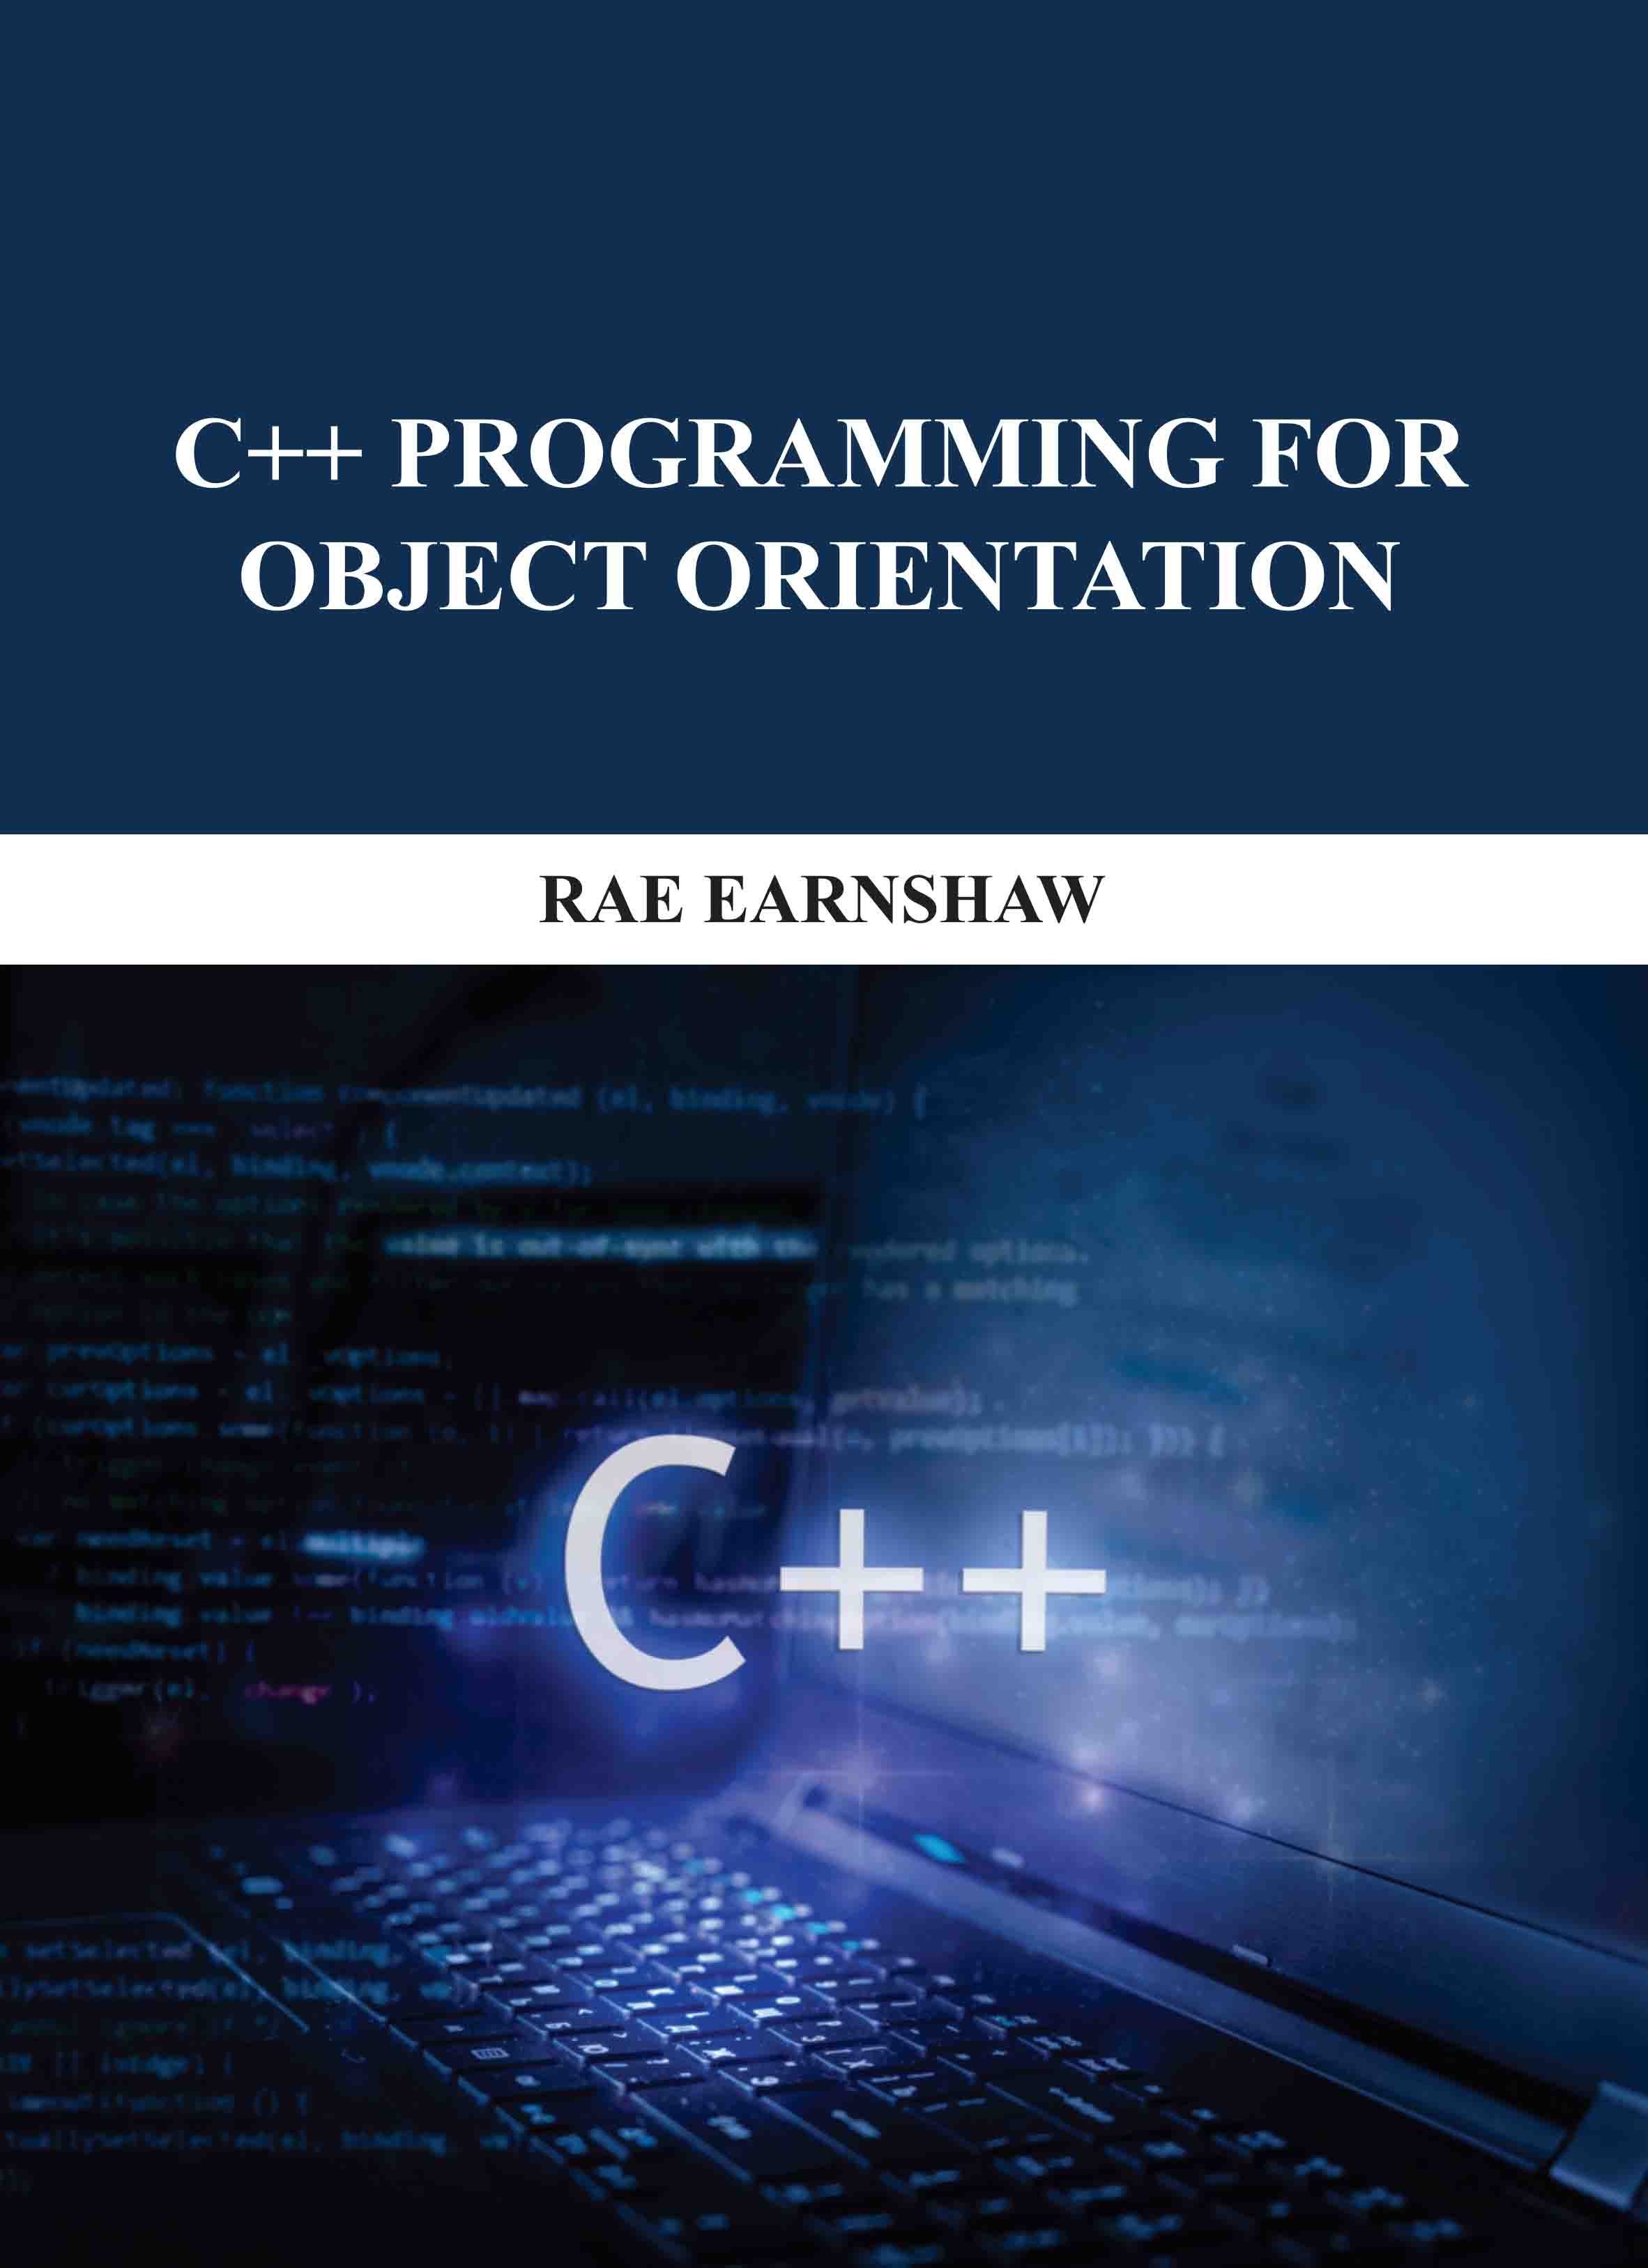 C++ Programming for Object Orientation